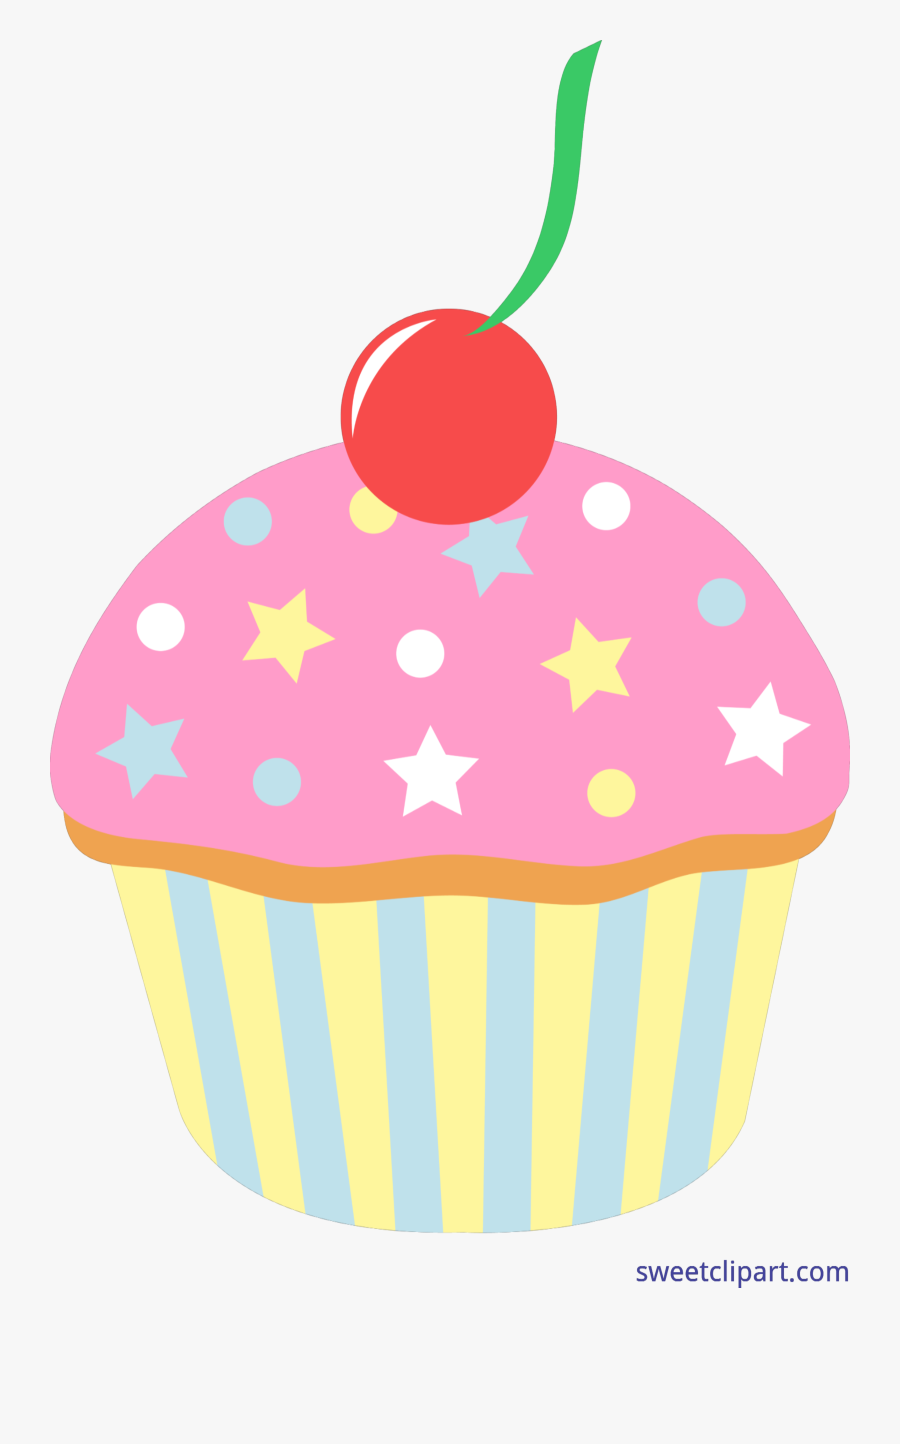 Collection Of Free Cupcake Vector Cherry On Top - Cartoon Cakes And Sweets, Transparent Clipart